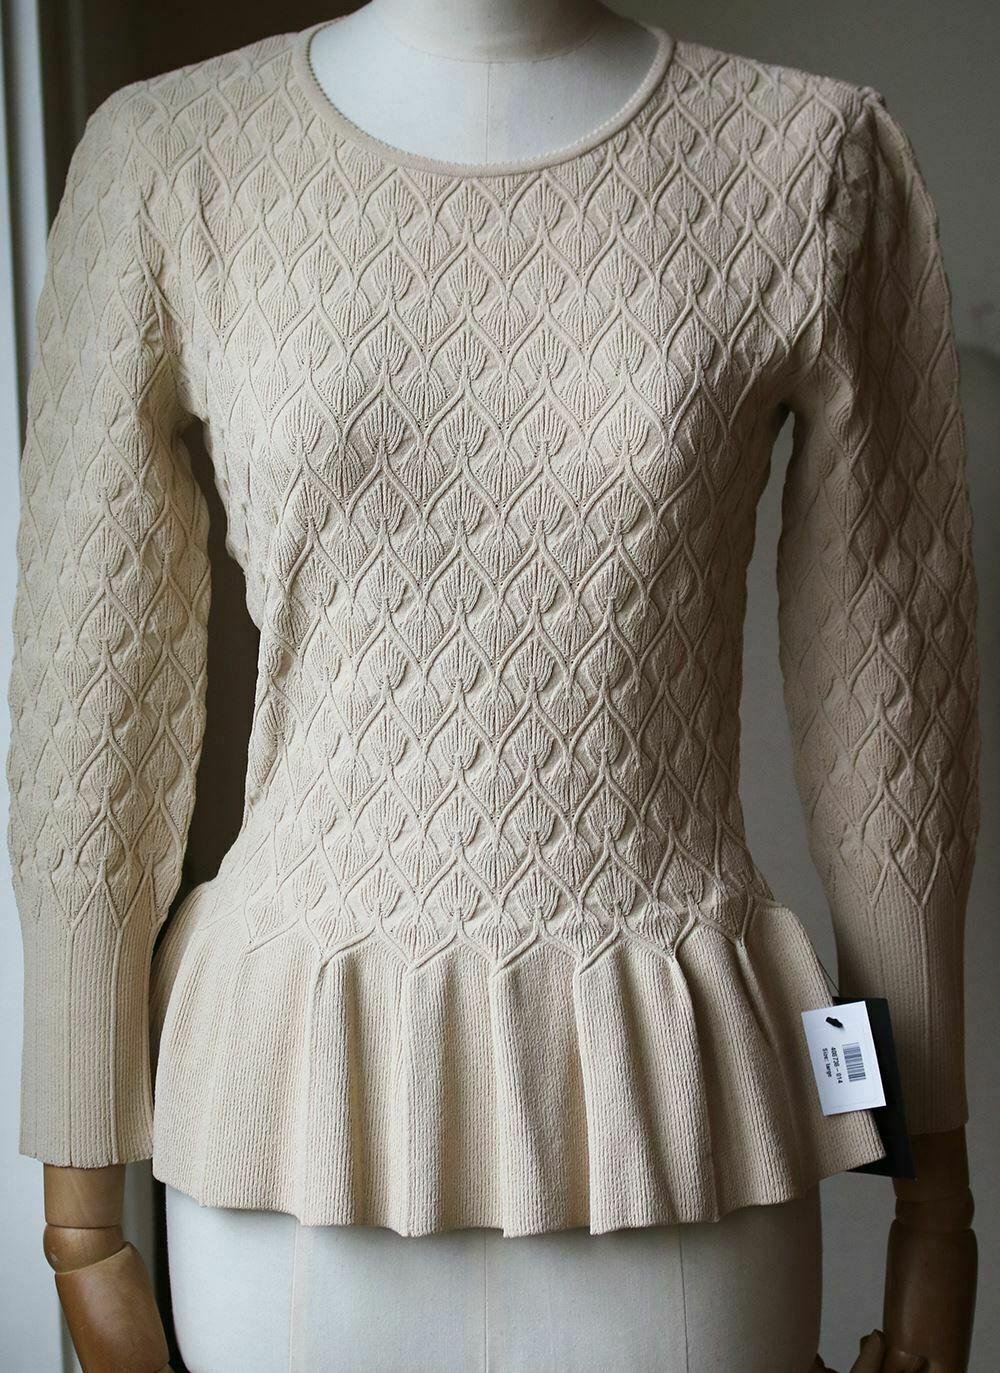 Alexander McQueen's knitted cream top has a flared peplum that creates the illusion of a cinched-in waist. Alexander McQueen cream top. Textured mid-weight viscose-blend. Peplum, ribbed trims. Slips on. 75% viscose, 25% polyester.

Size: Large (UK